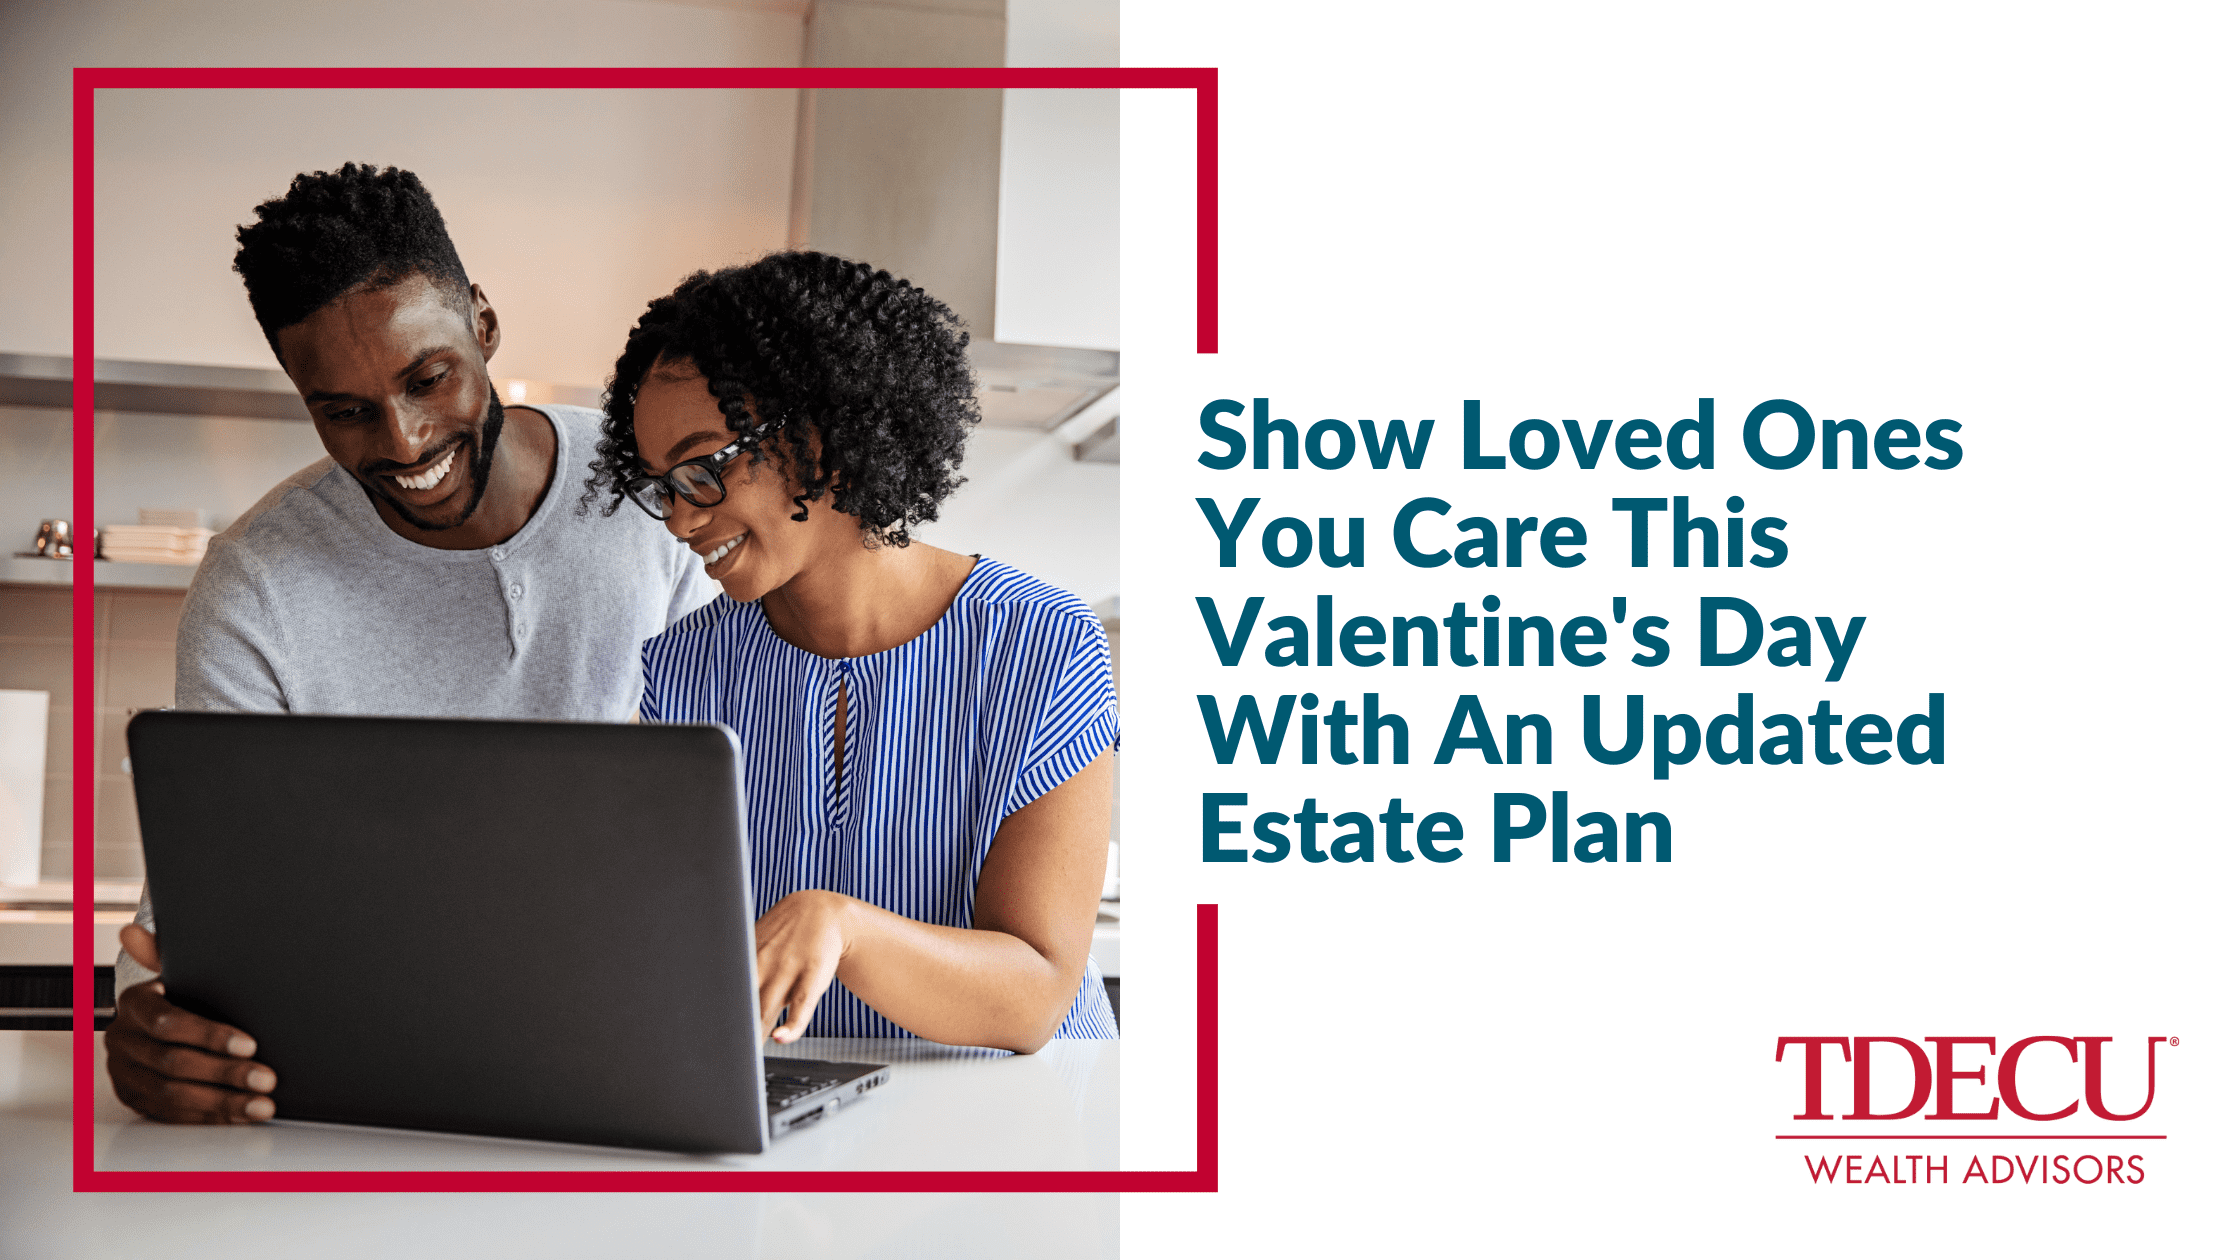 Show Loved Ones You Care This Valentine's Day With An Updated Estate Plan